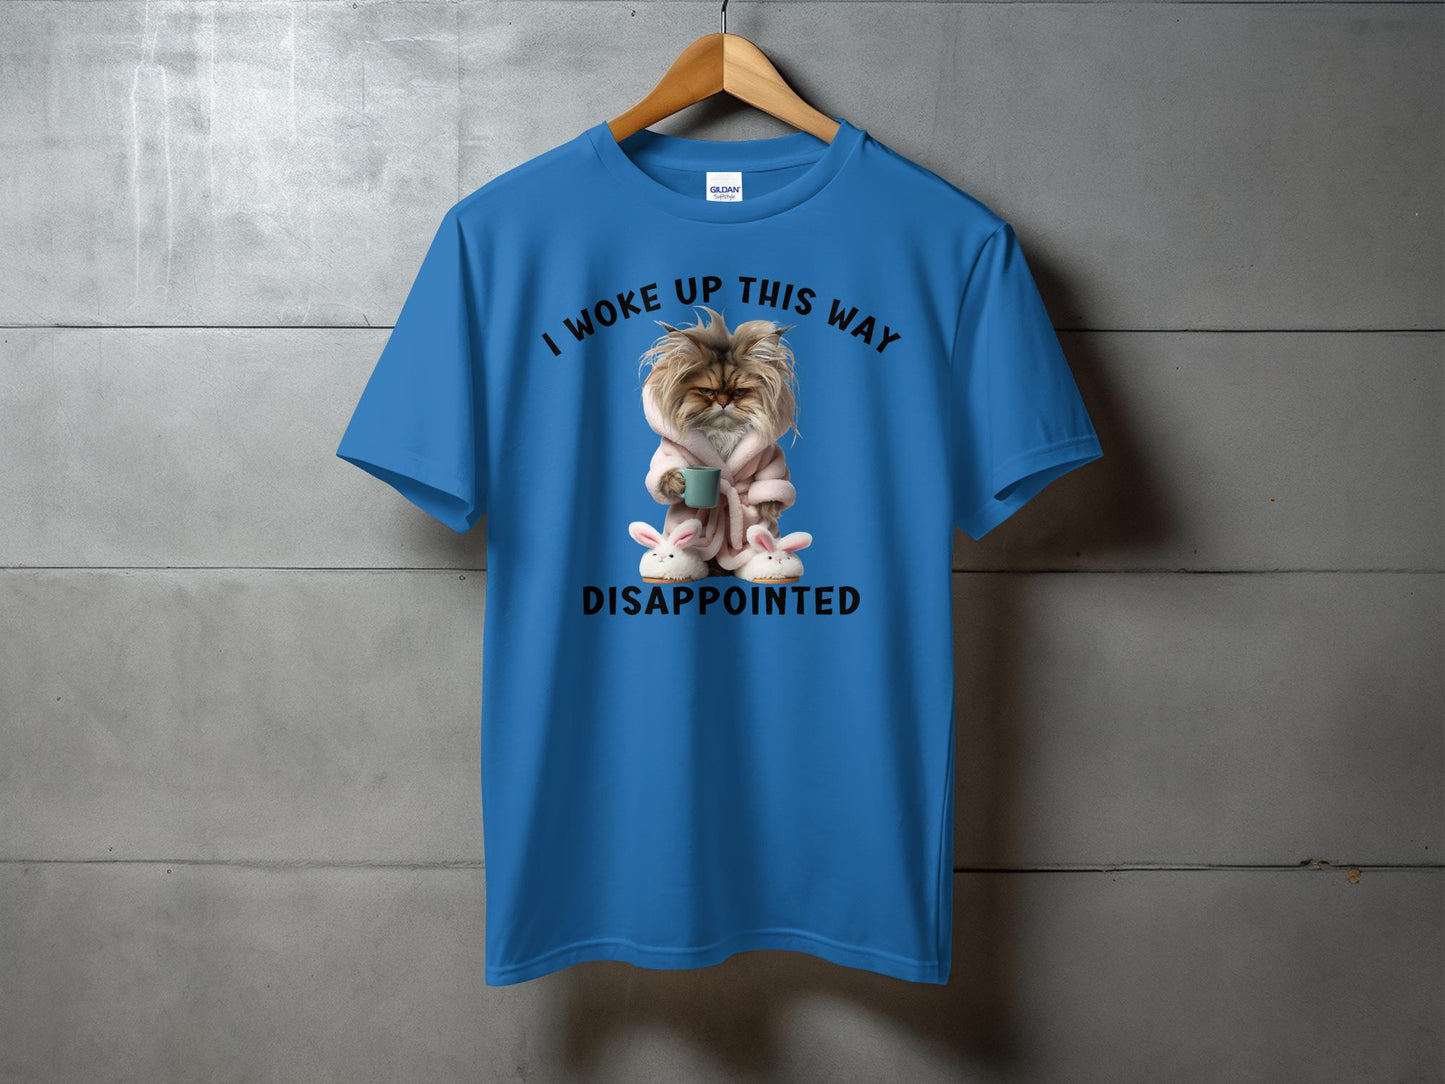 Funny Cat T-Shirt, I Woke Up This Way Disappointed, Grumpy Cat with Coffee Mug, Unique Graphic Tee, Unisex T-Shirt, Cotton Shirt